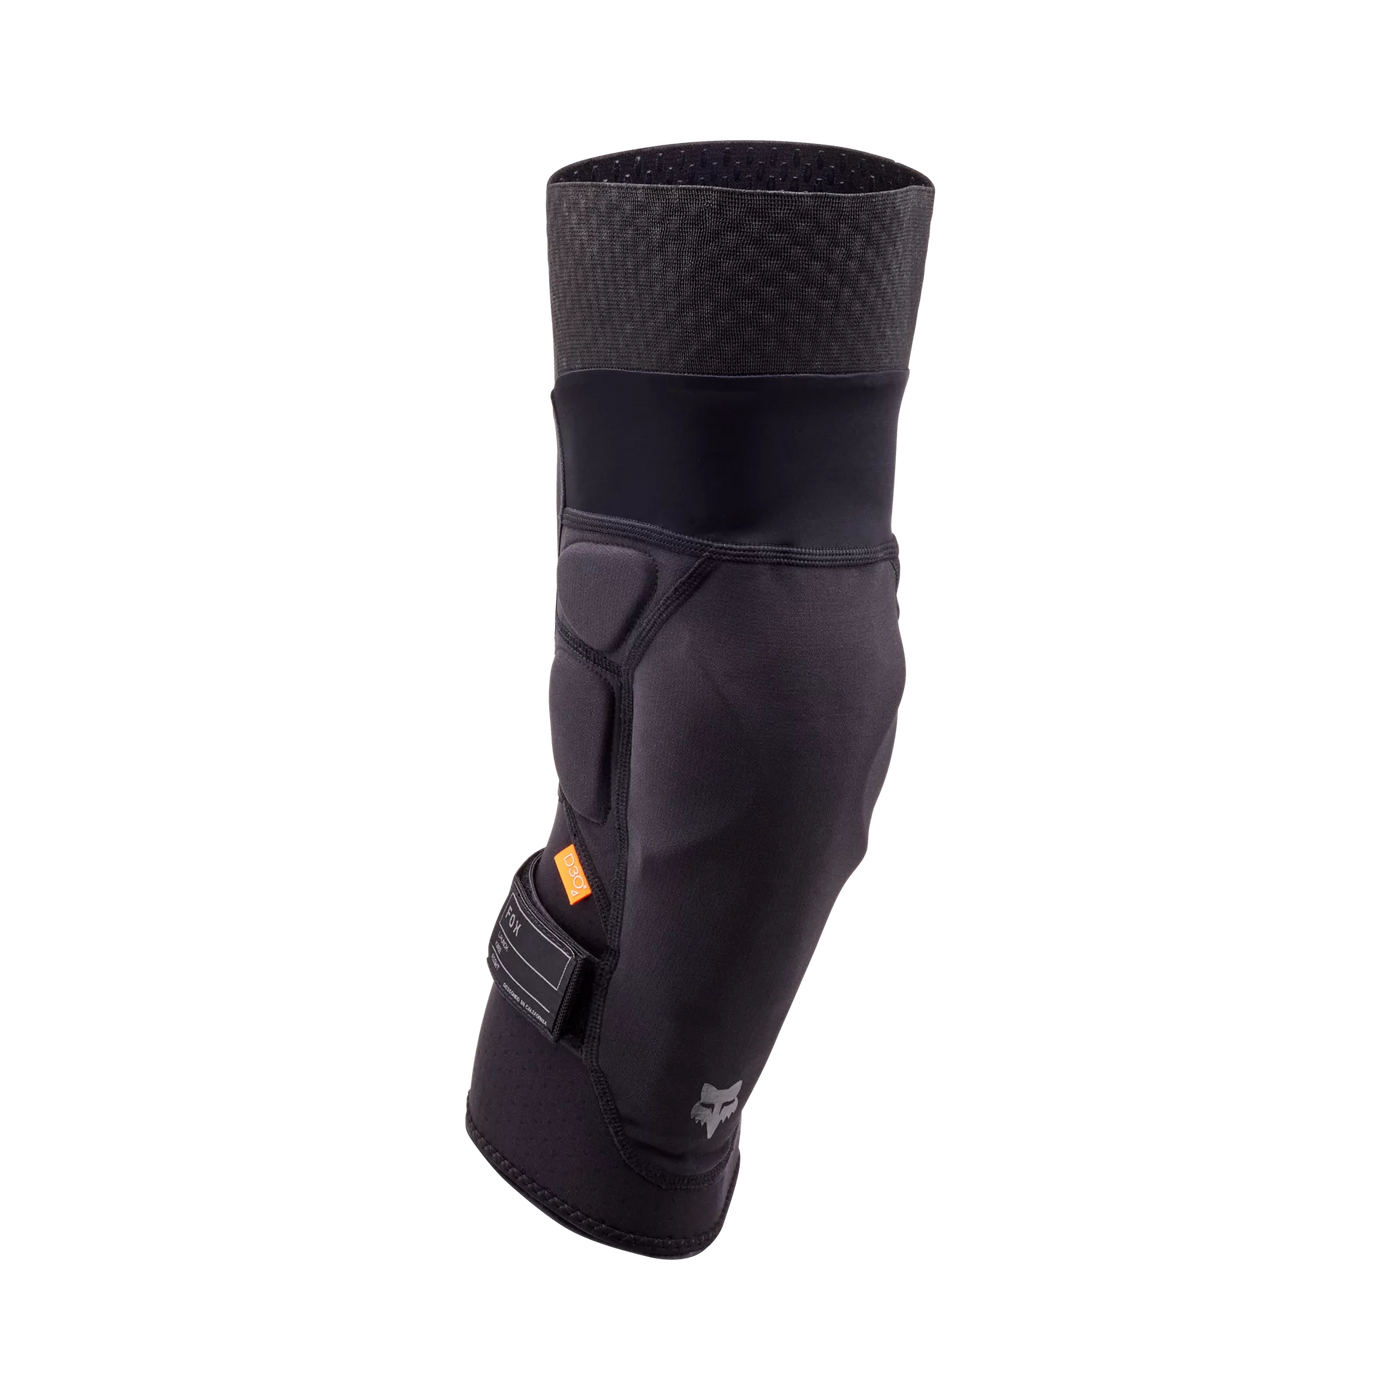 Launch Knee Guards